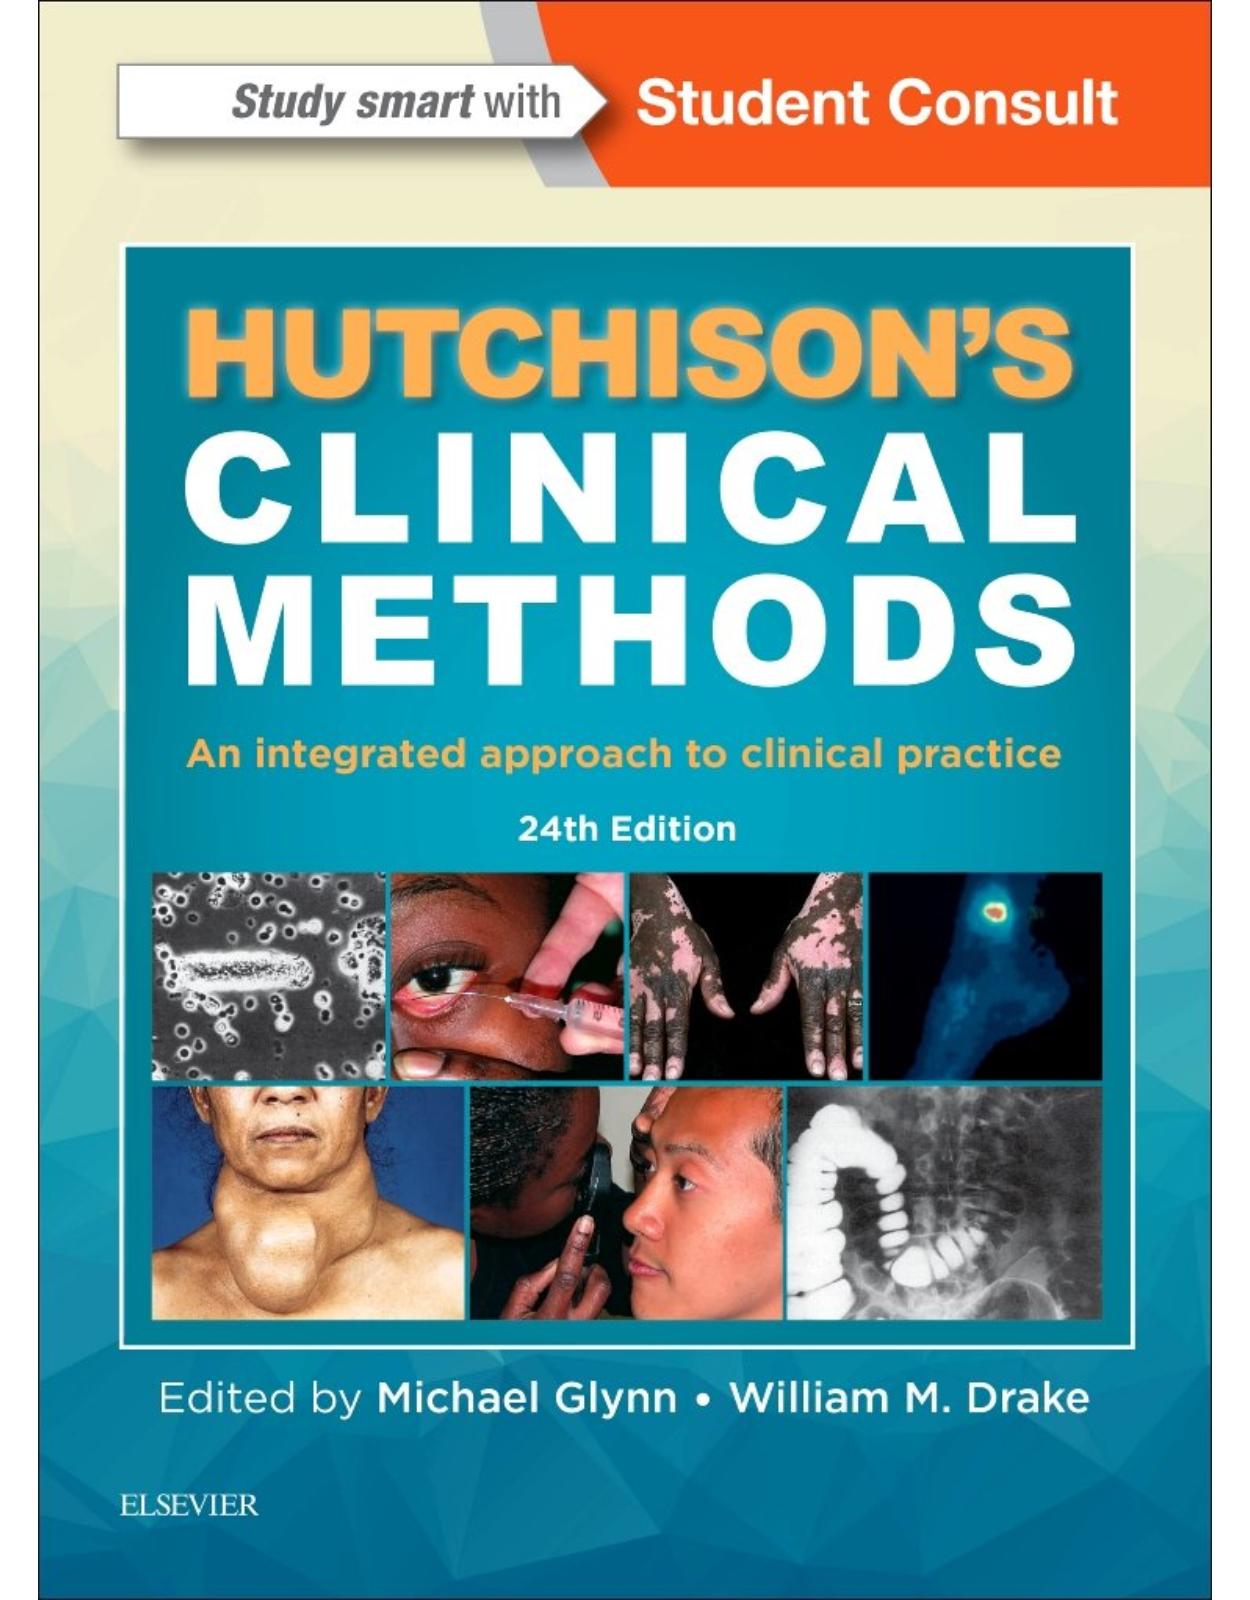 Hutchison's Clinical Methods: An Integrated Approach to Clinical Practice, 24e